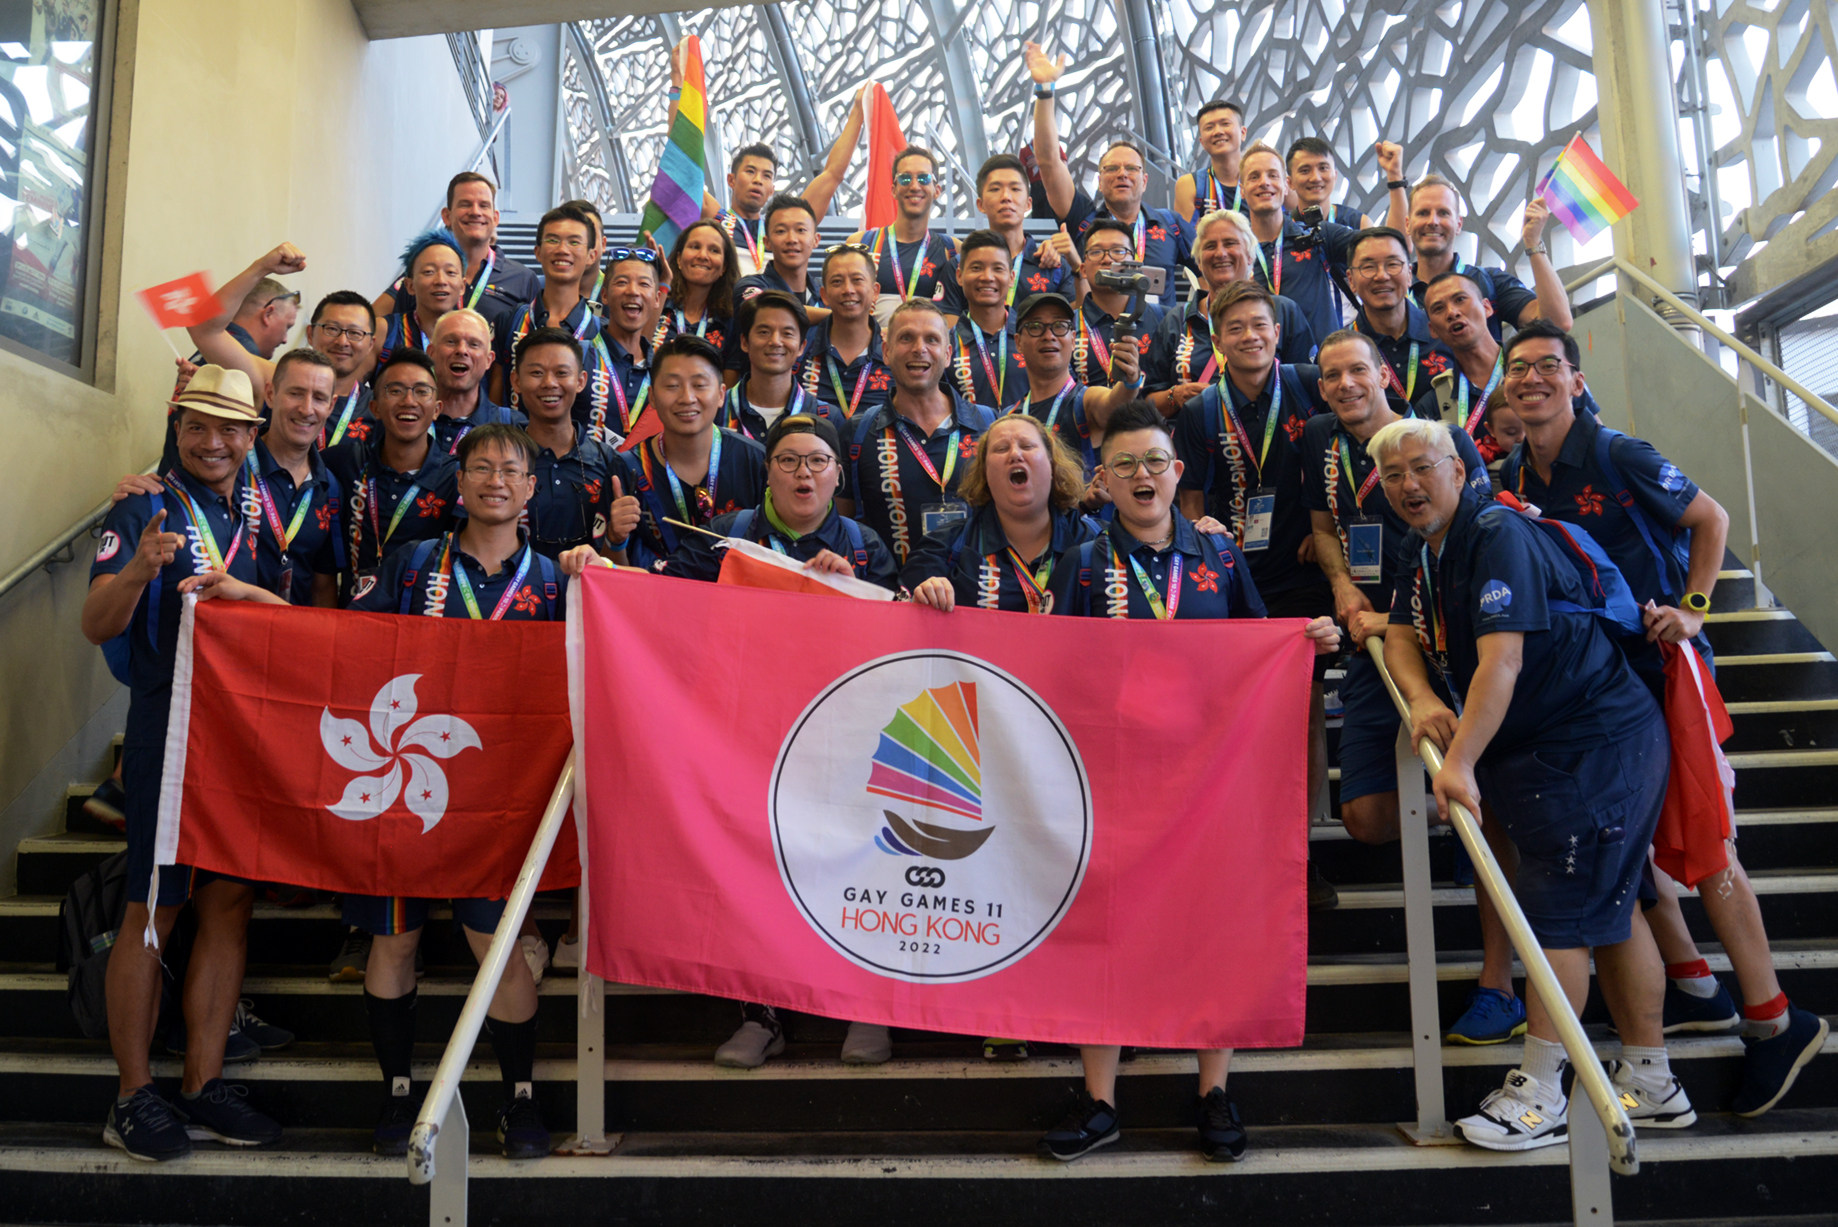 Hong Kong won the bid to host the 2022 Gay Games after applying in 2017. The event was postponed until 2023 because of the Covid pandemic. Photo: Gay Games Hong Kong